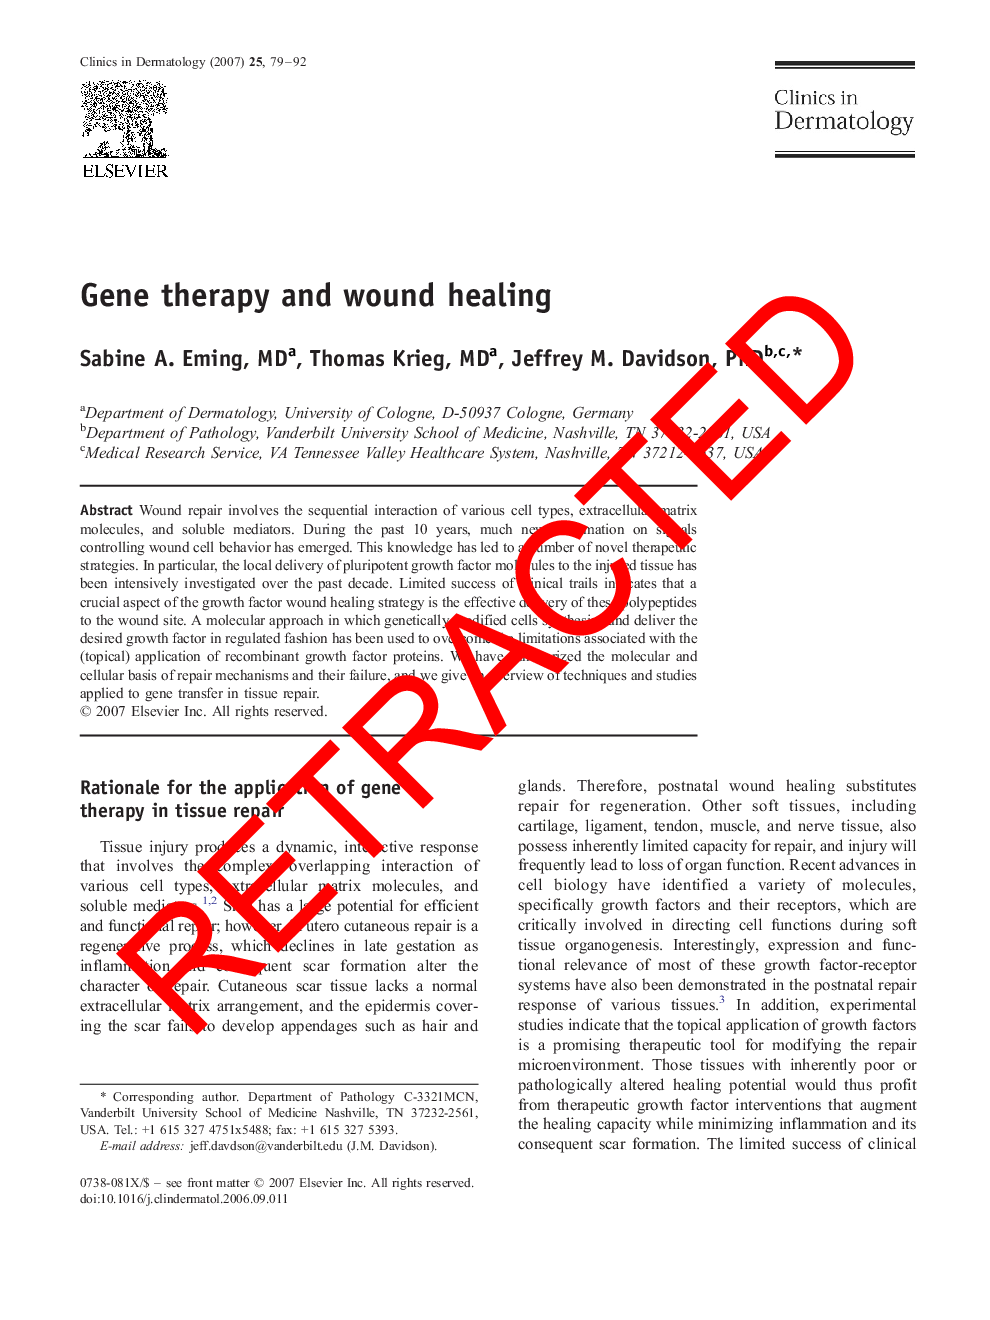 RETRACTED: Gene therapy and wound healing